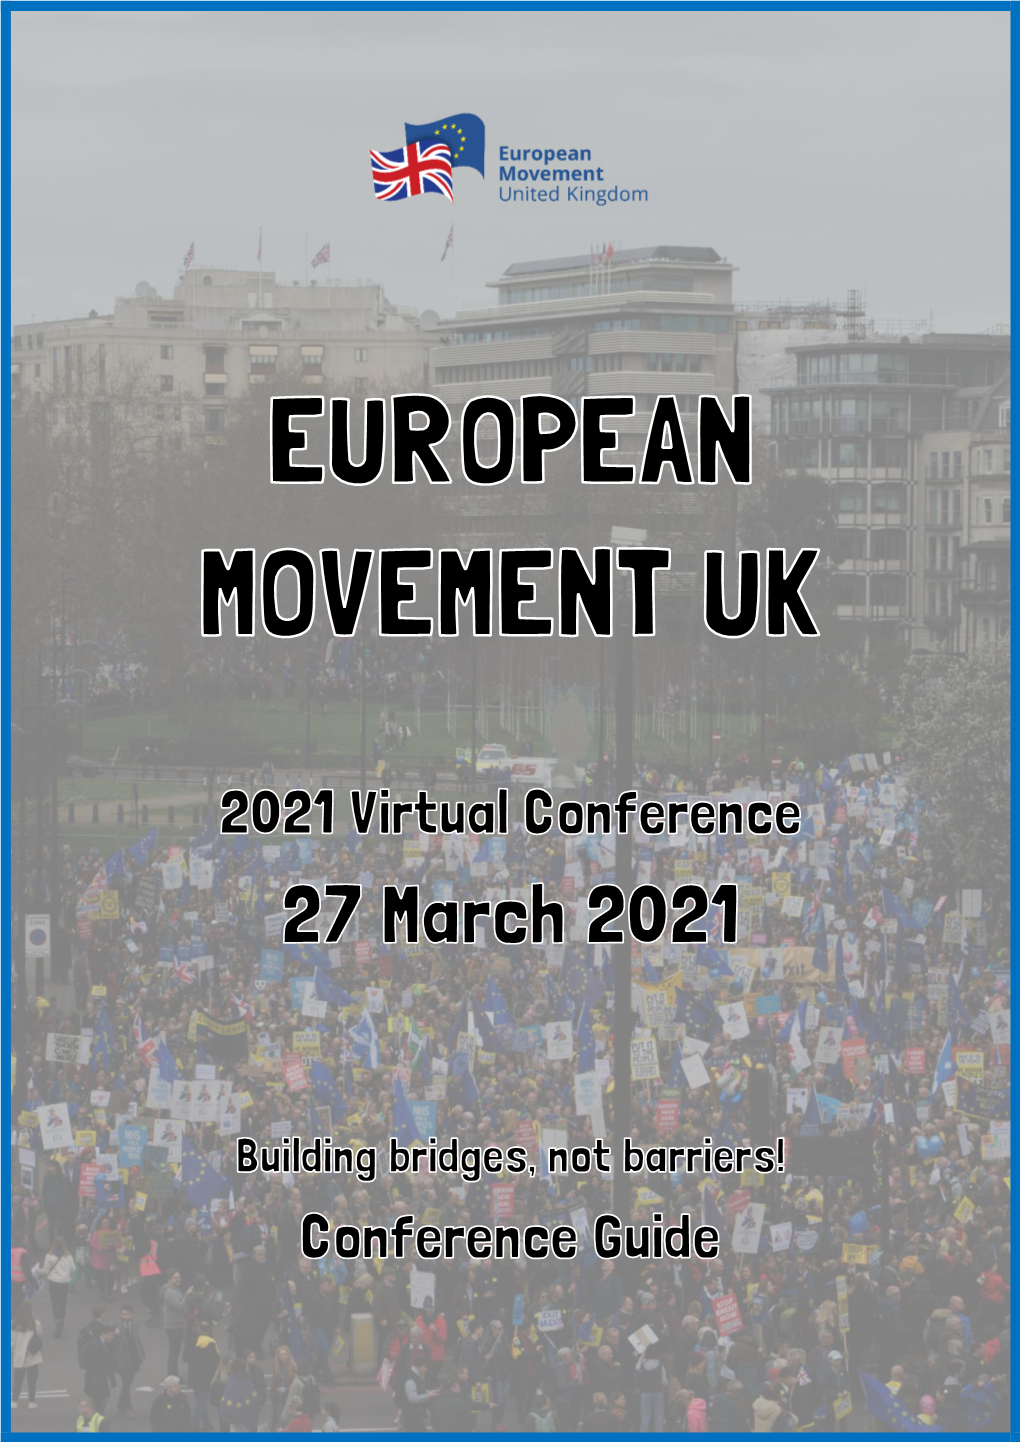 Conference Guide for the 2021 European Movement Virtual Conference